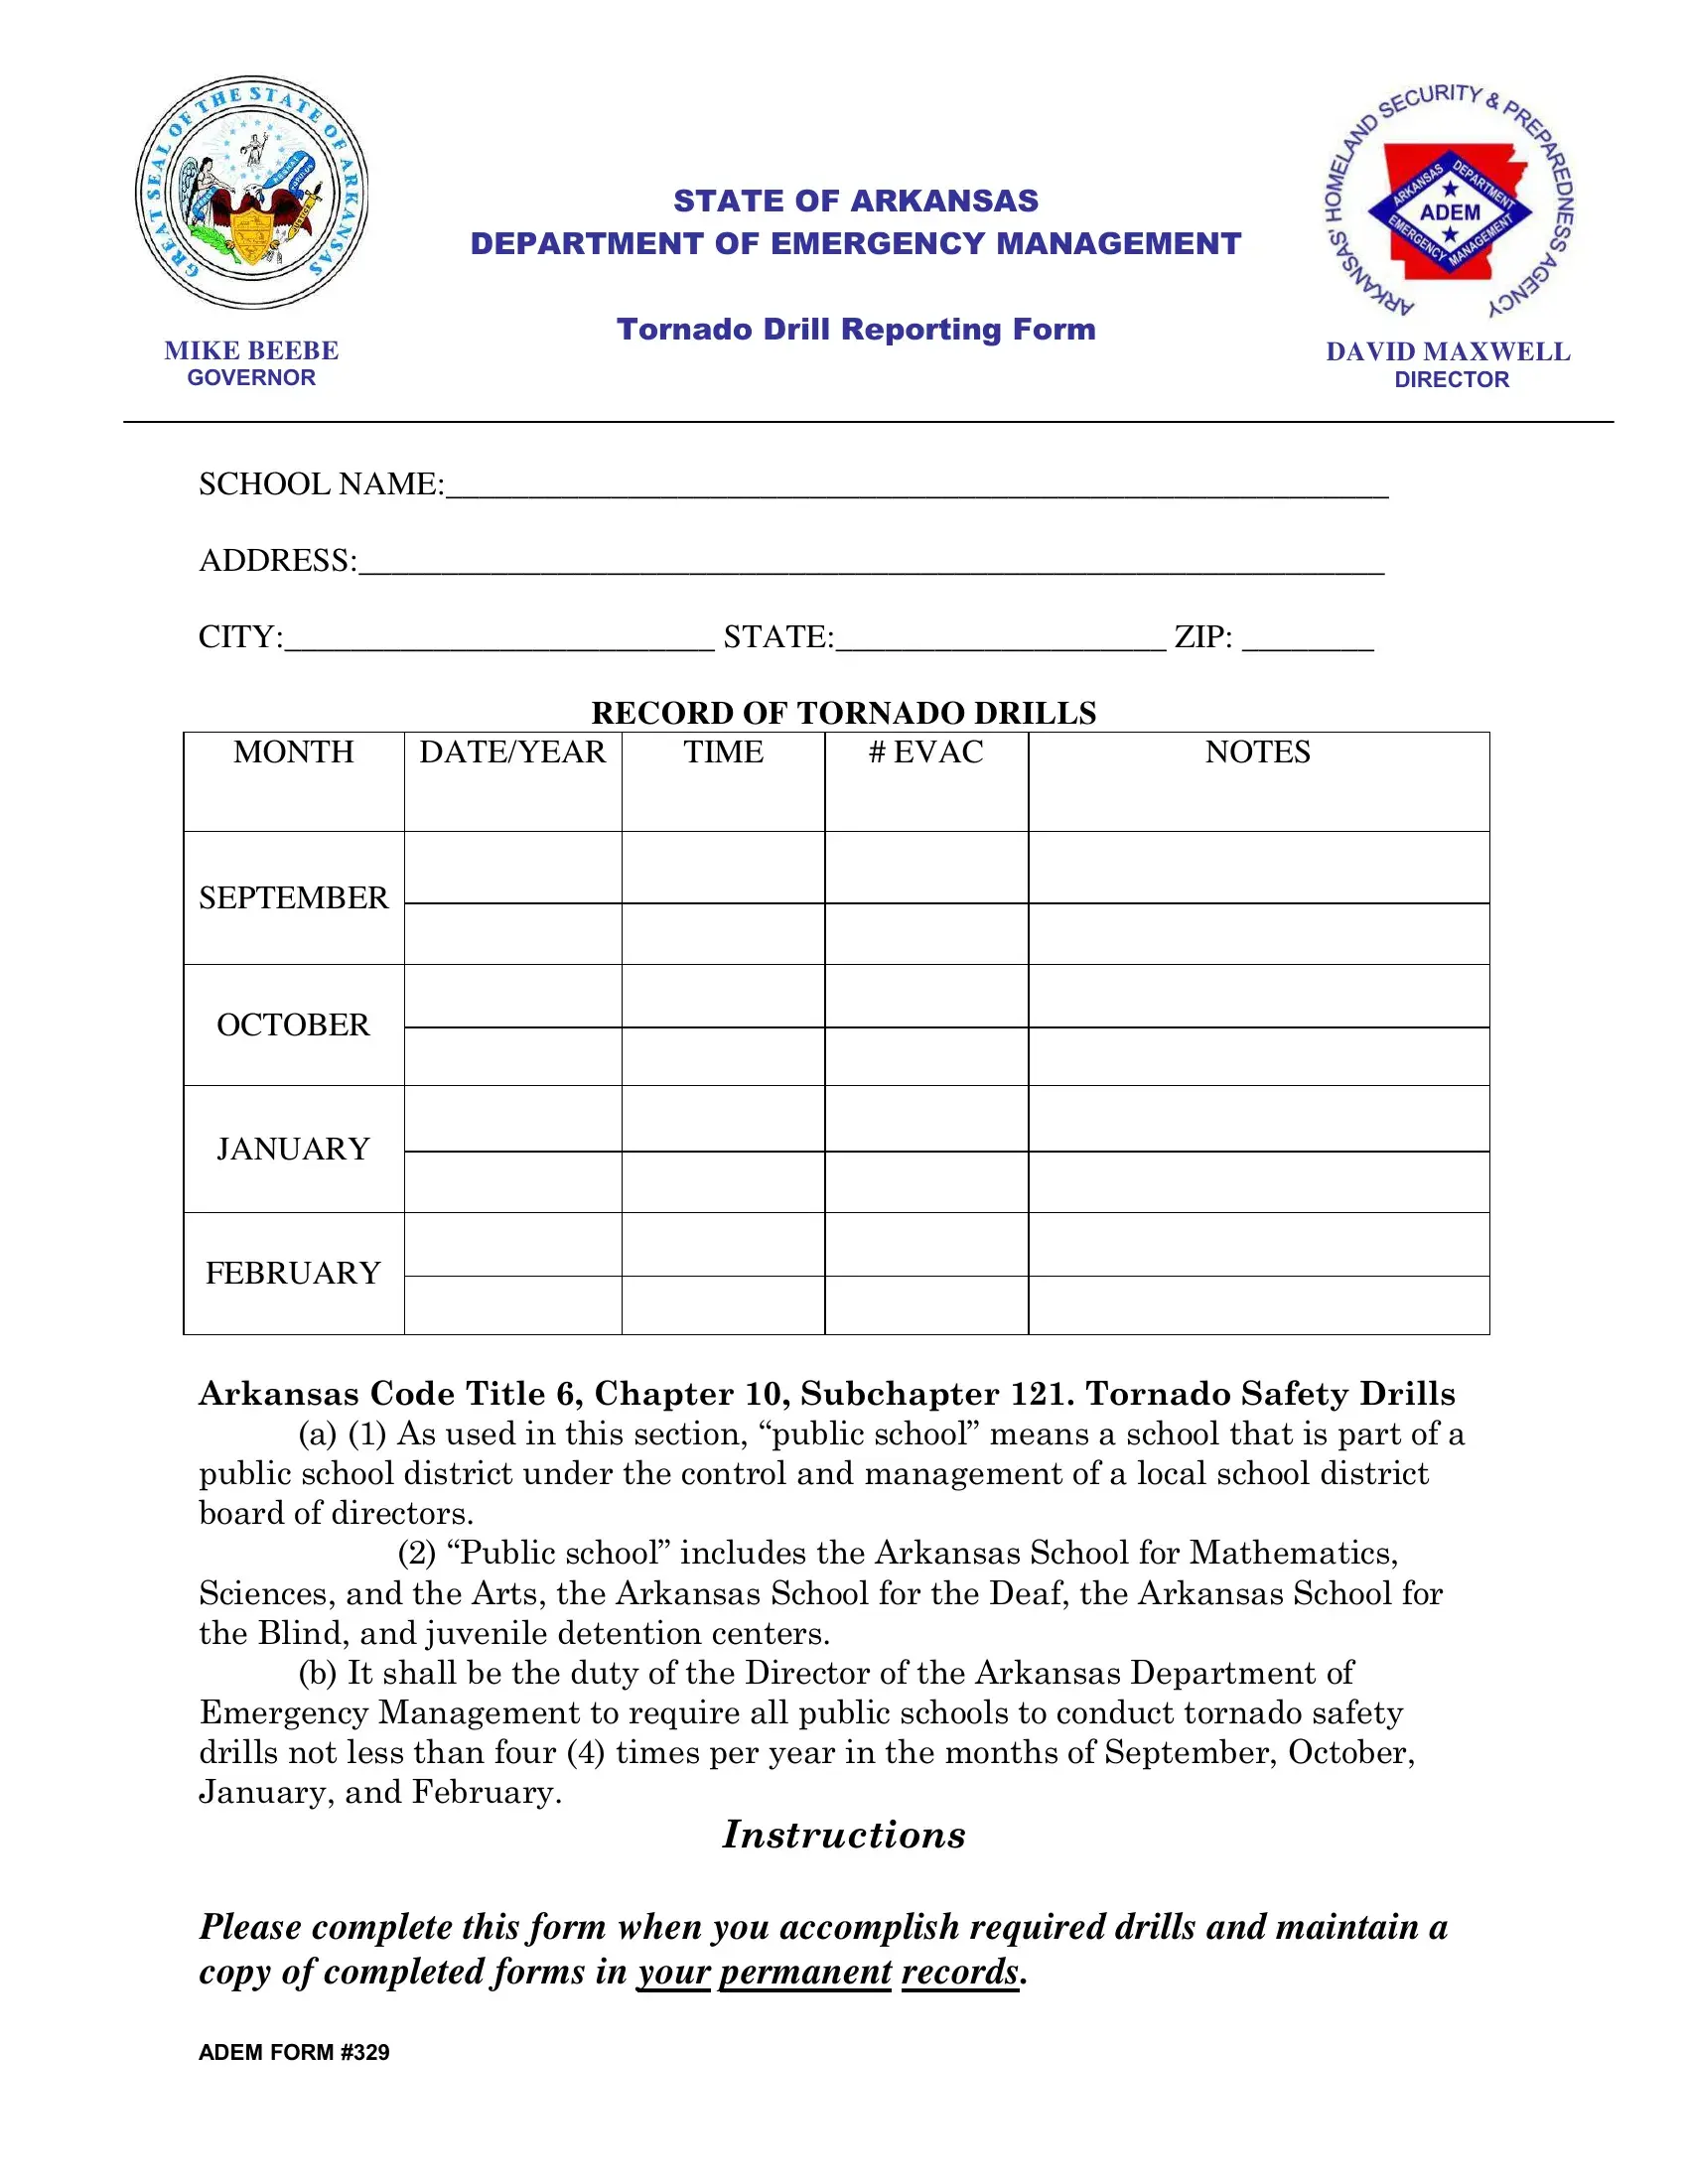 tornado-drill-report-form-fill-out-printable-pdf-forms-online